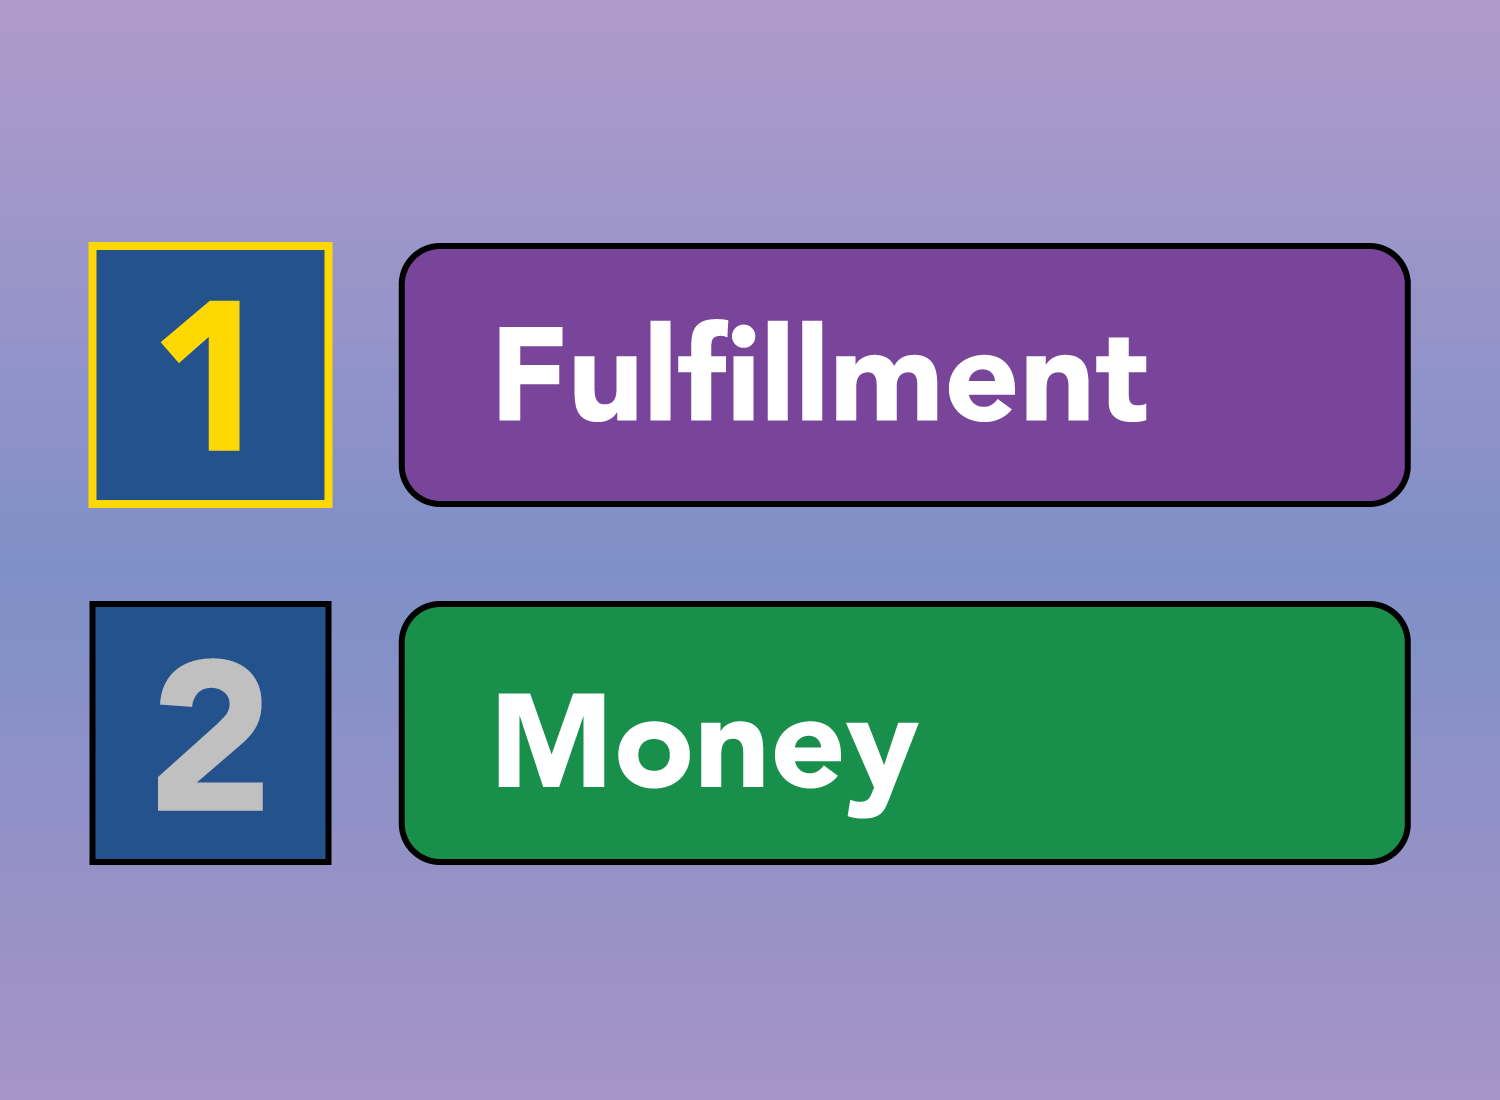 fulfillment over money - freedom in work